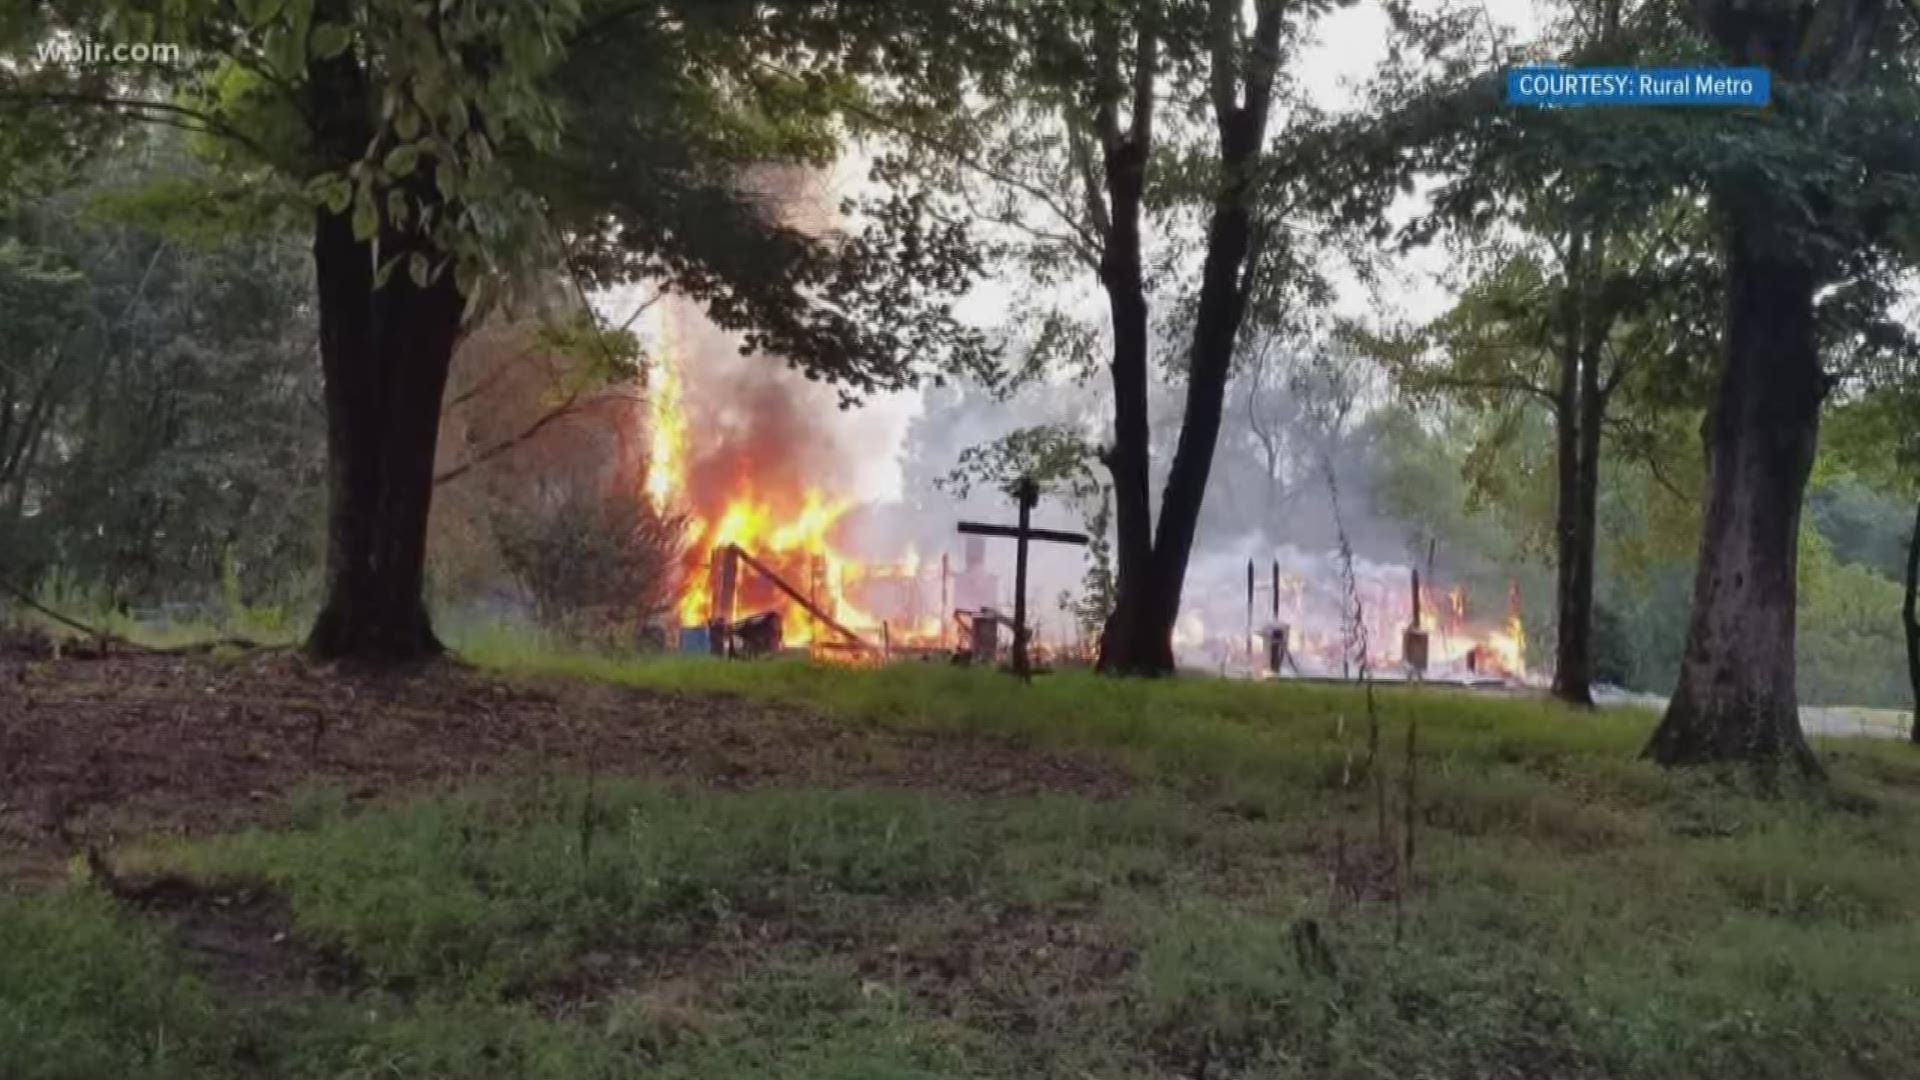 the andersonville fire department says there are no fatalities in a fire that officials are calling an arson in anderson county